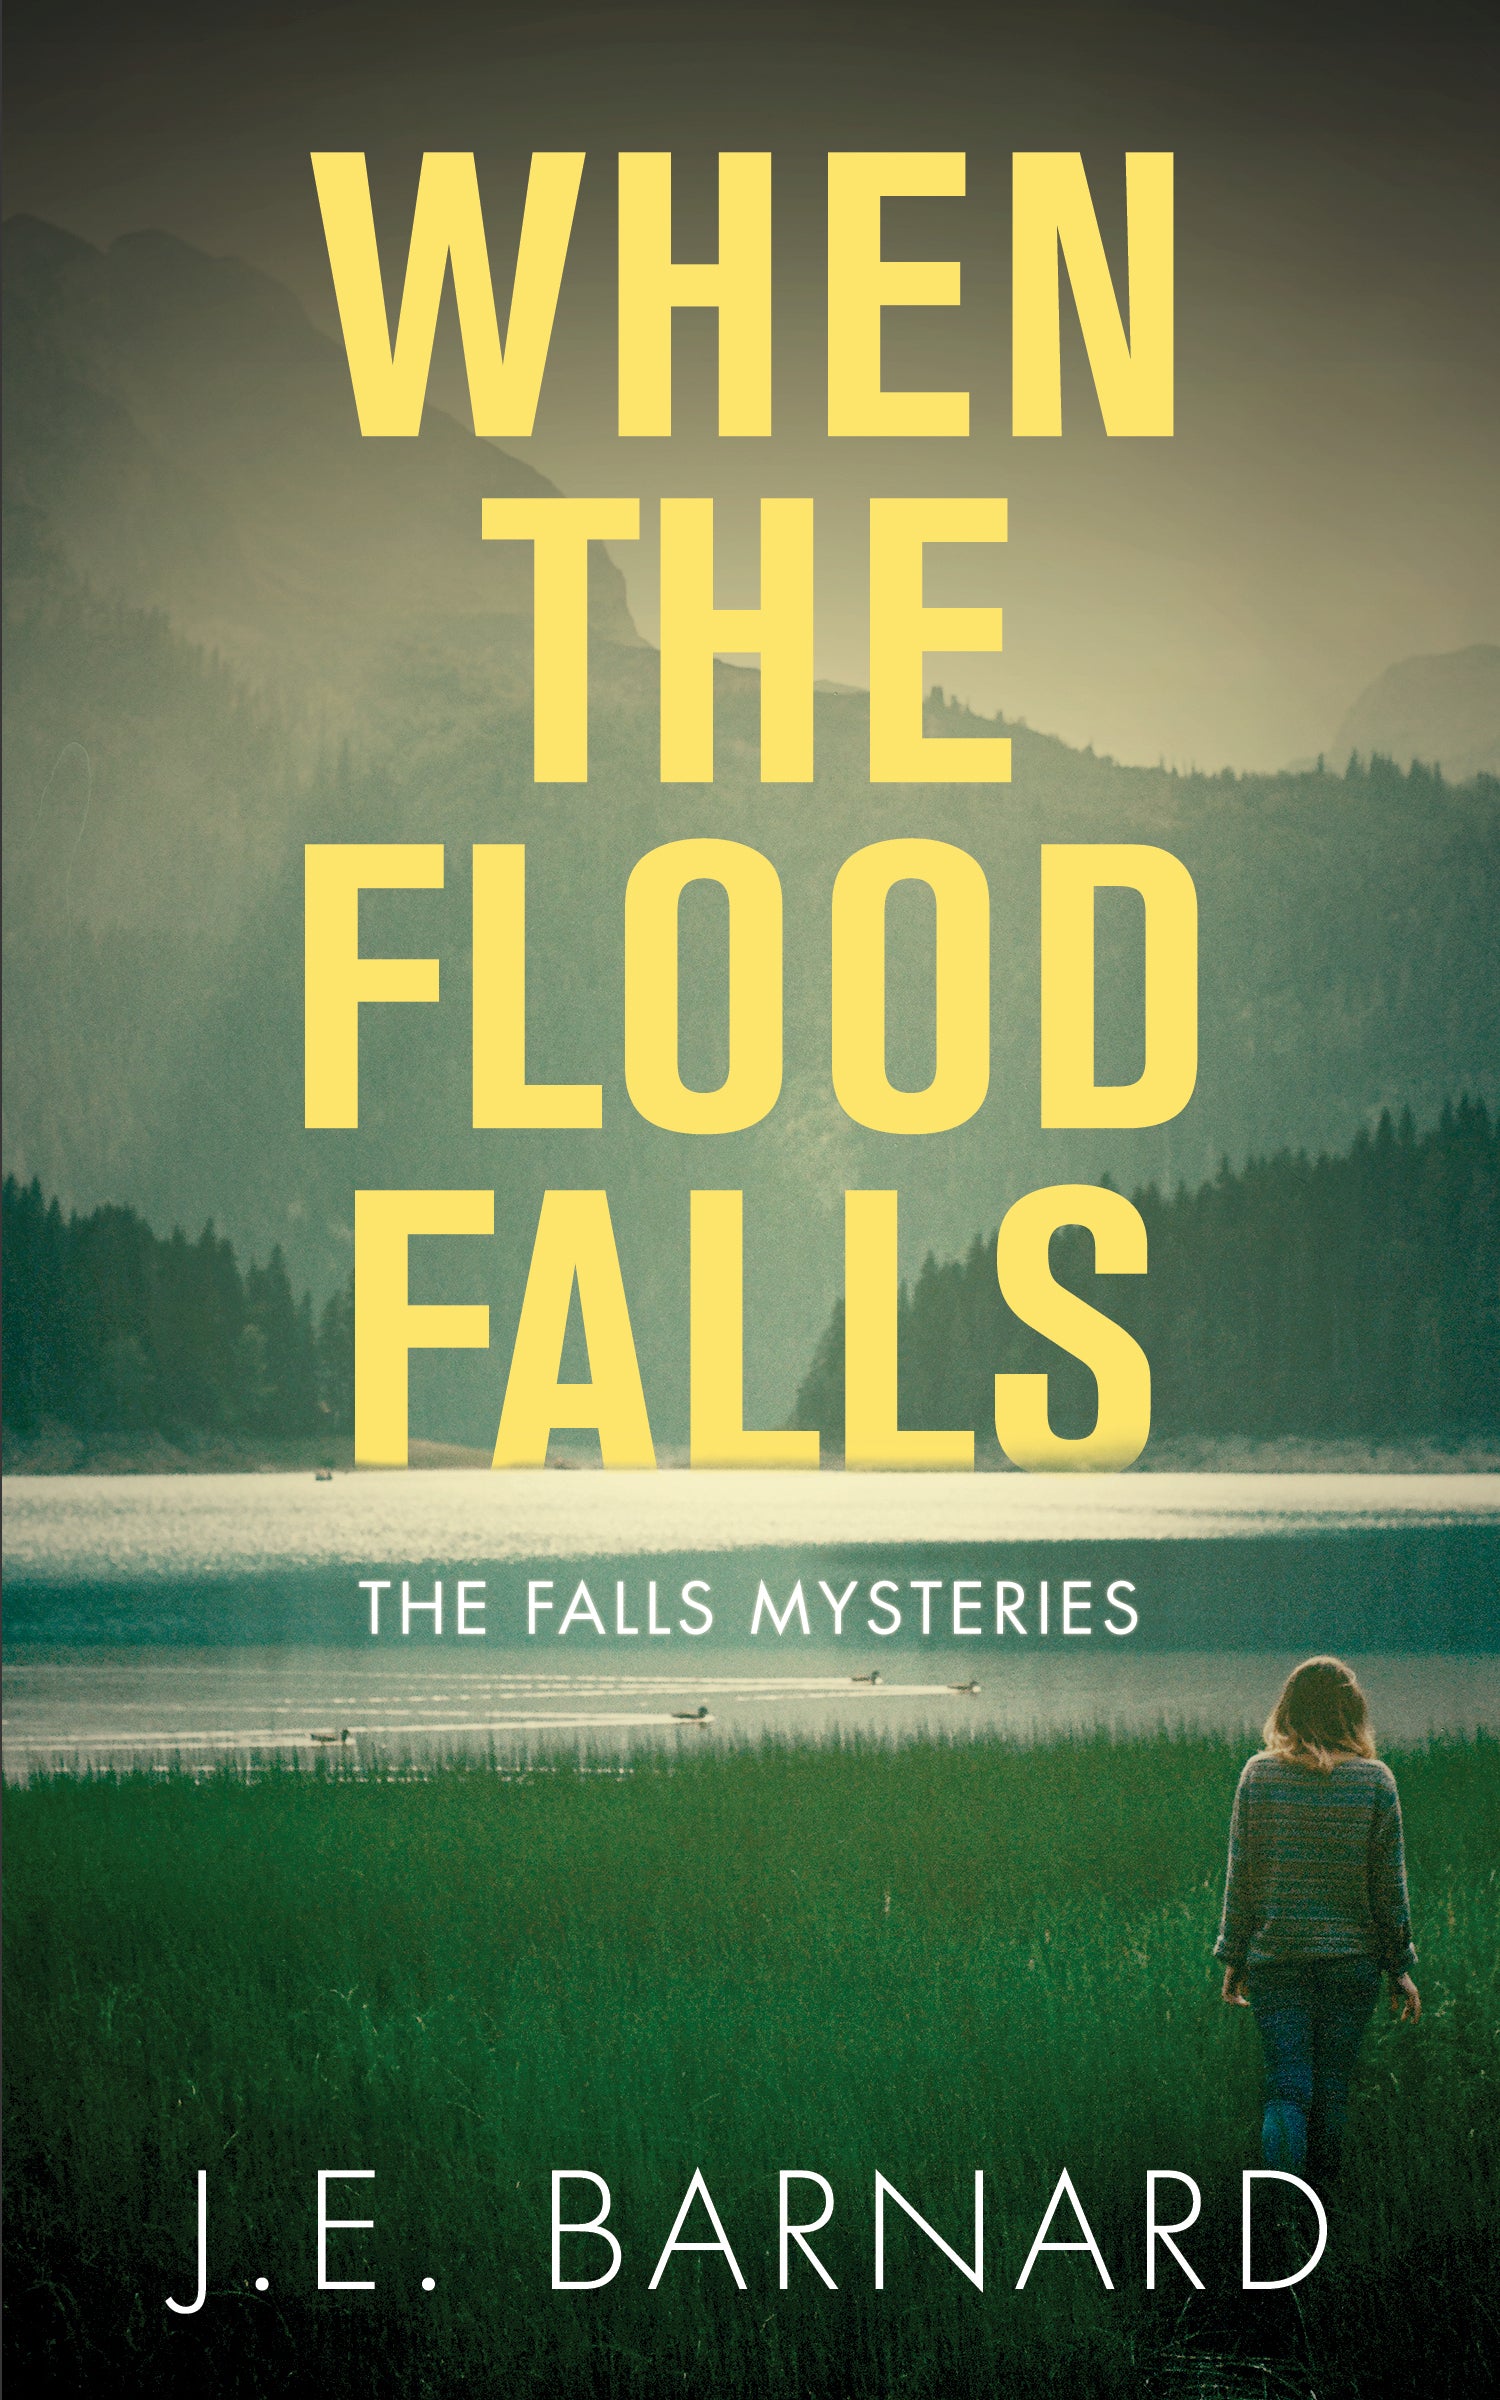 When the Flood Falls